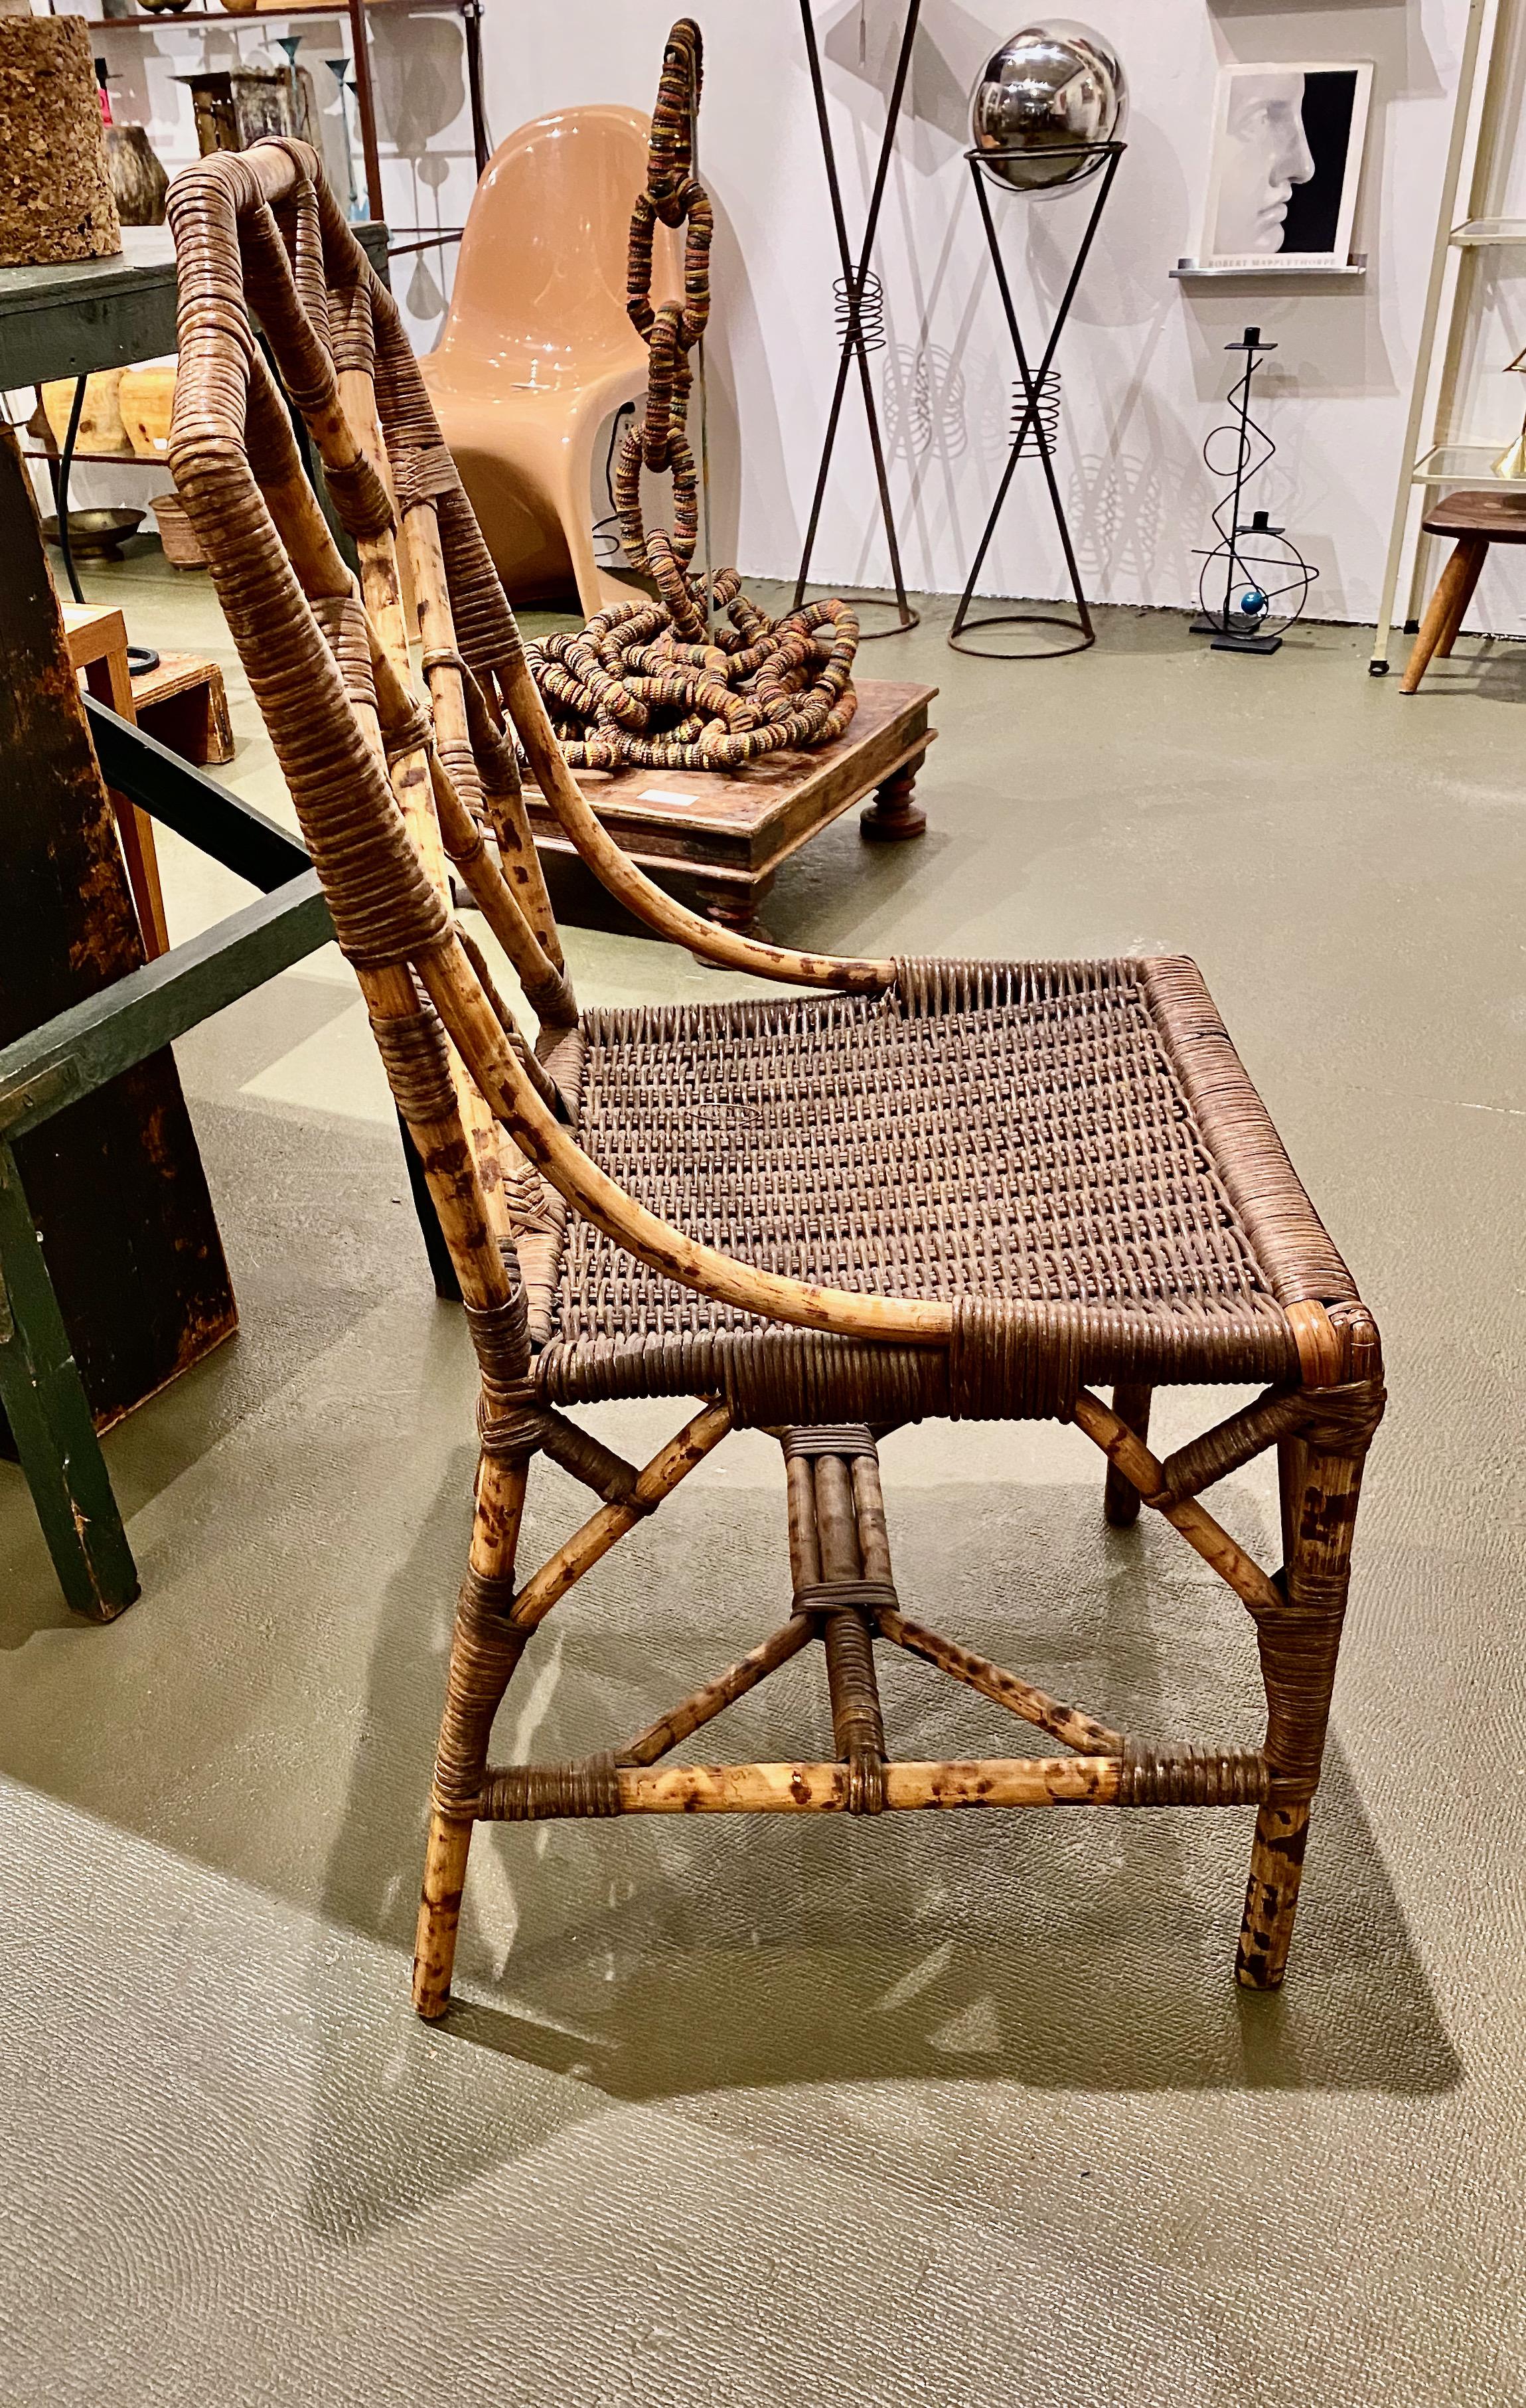 20th Century Wicker and Bamboo Side Chairs, c. 1930-1940